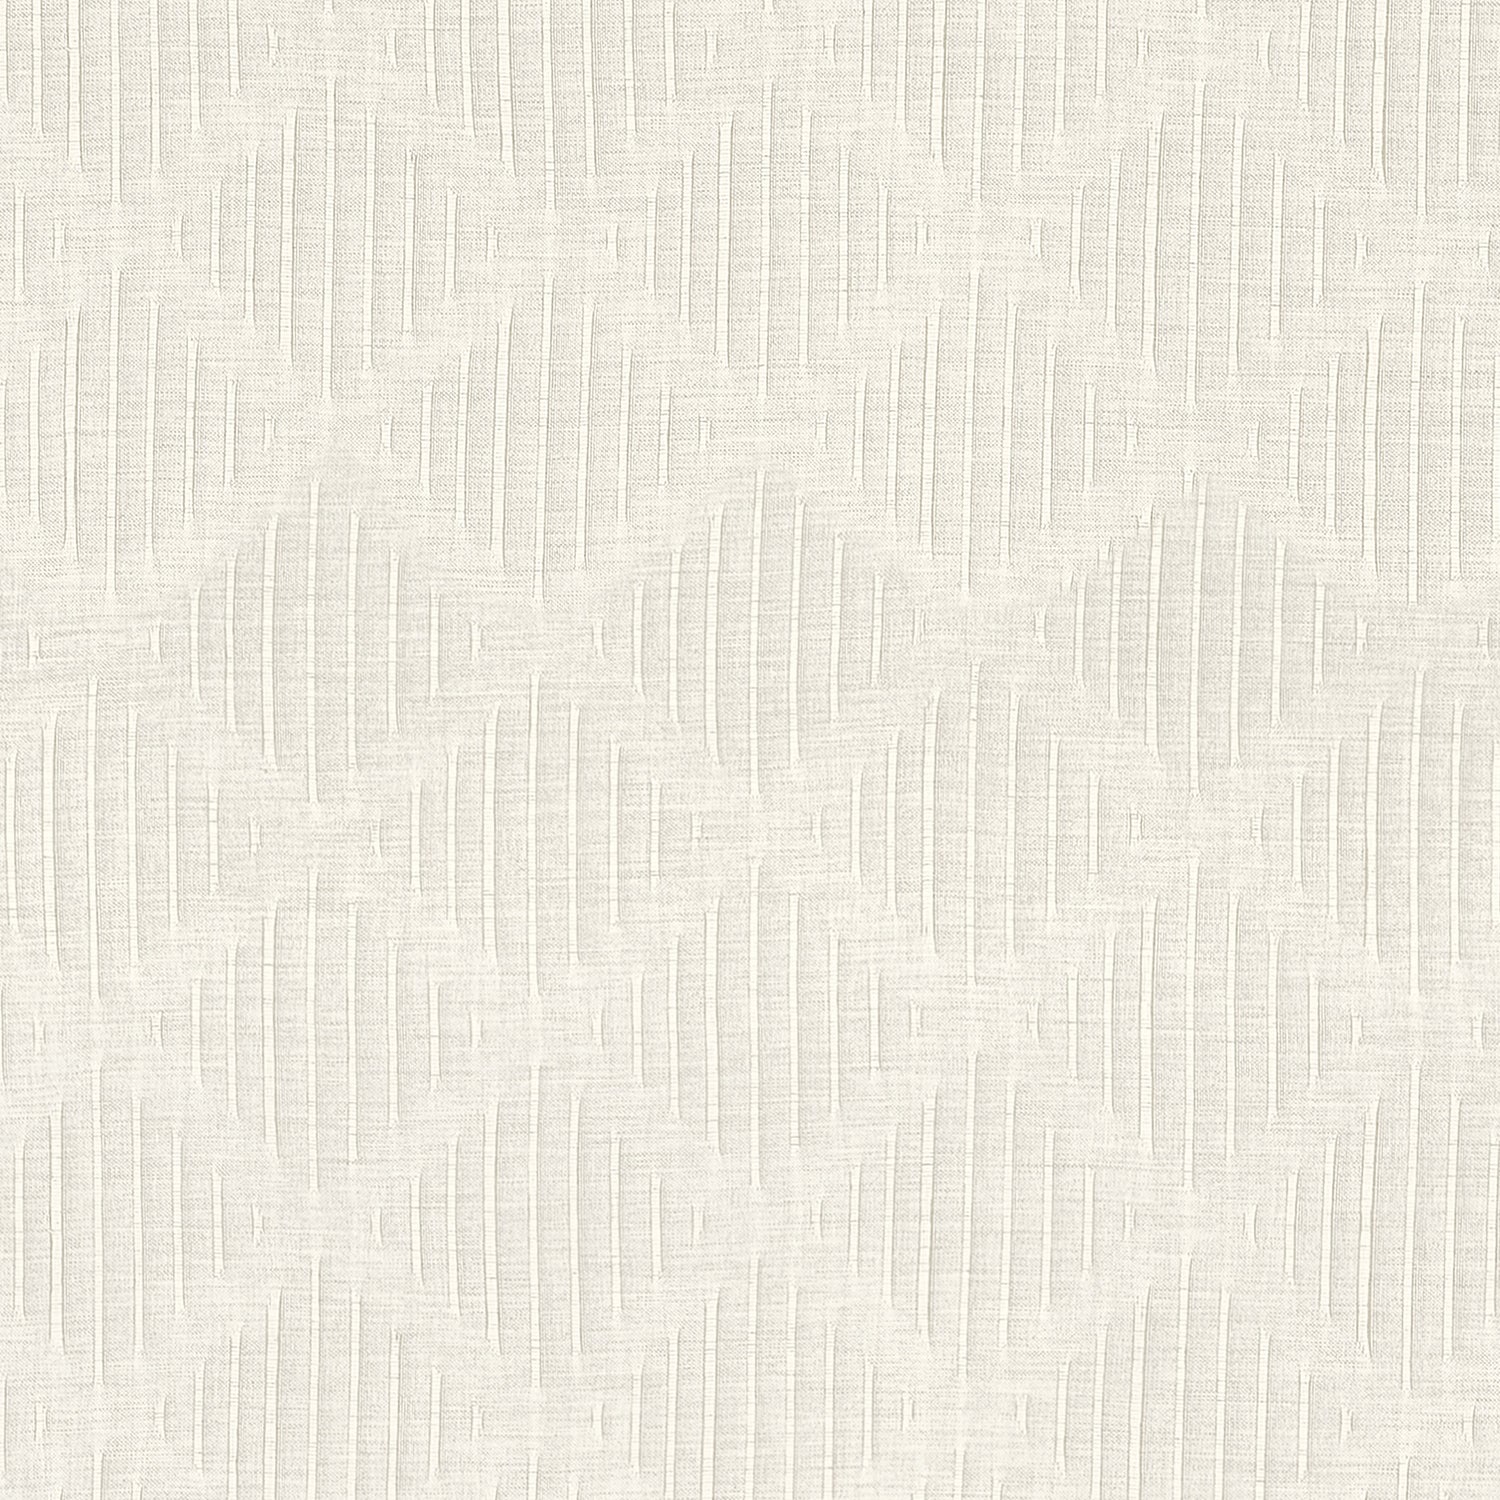 Dunlin fabric in platinum color - pattern number FWW81772 - by Thibaut in the Locale Wide Width collection